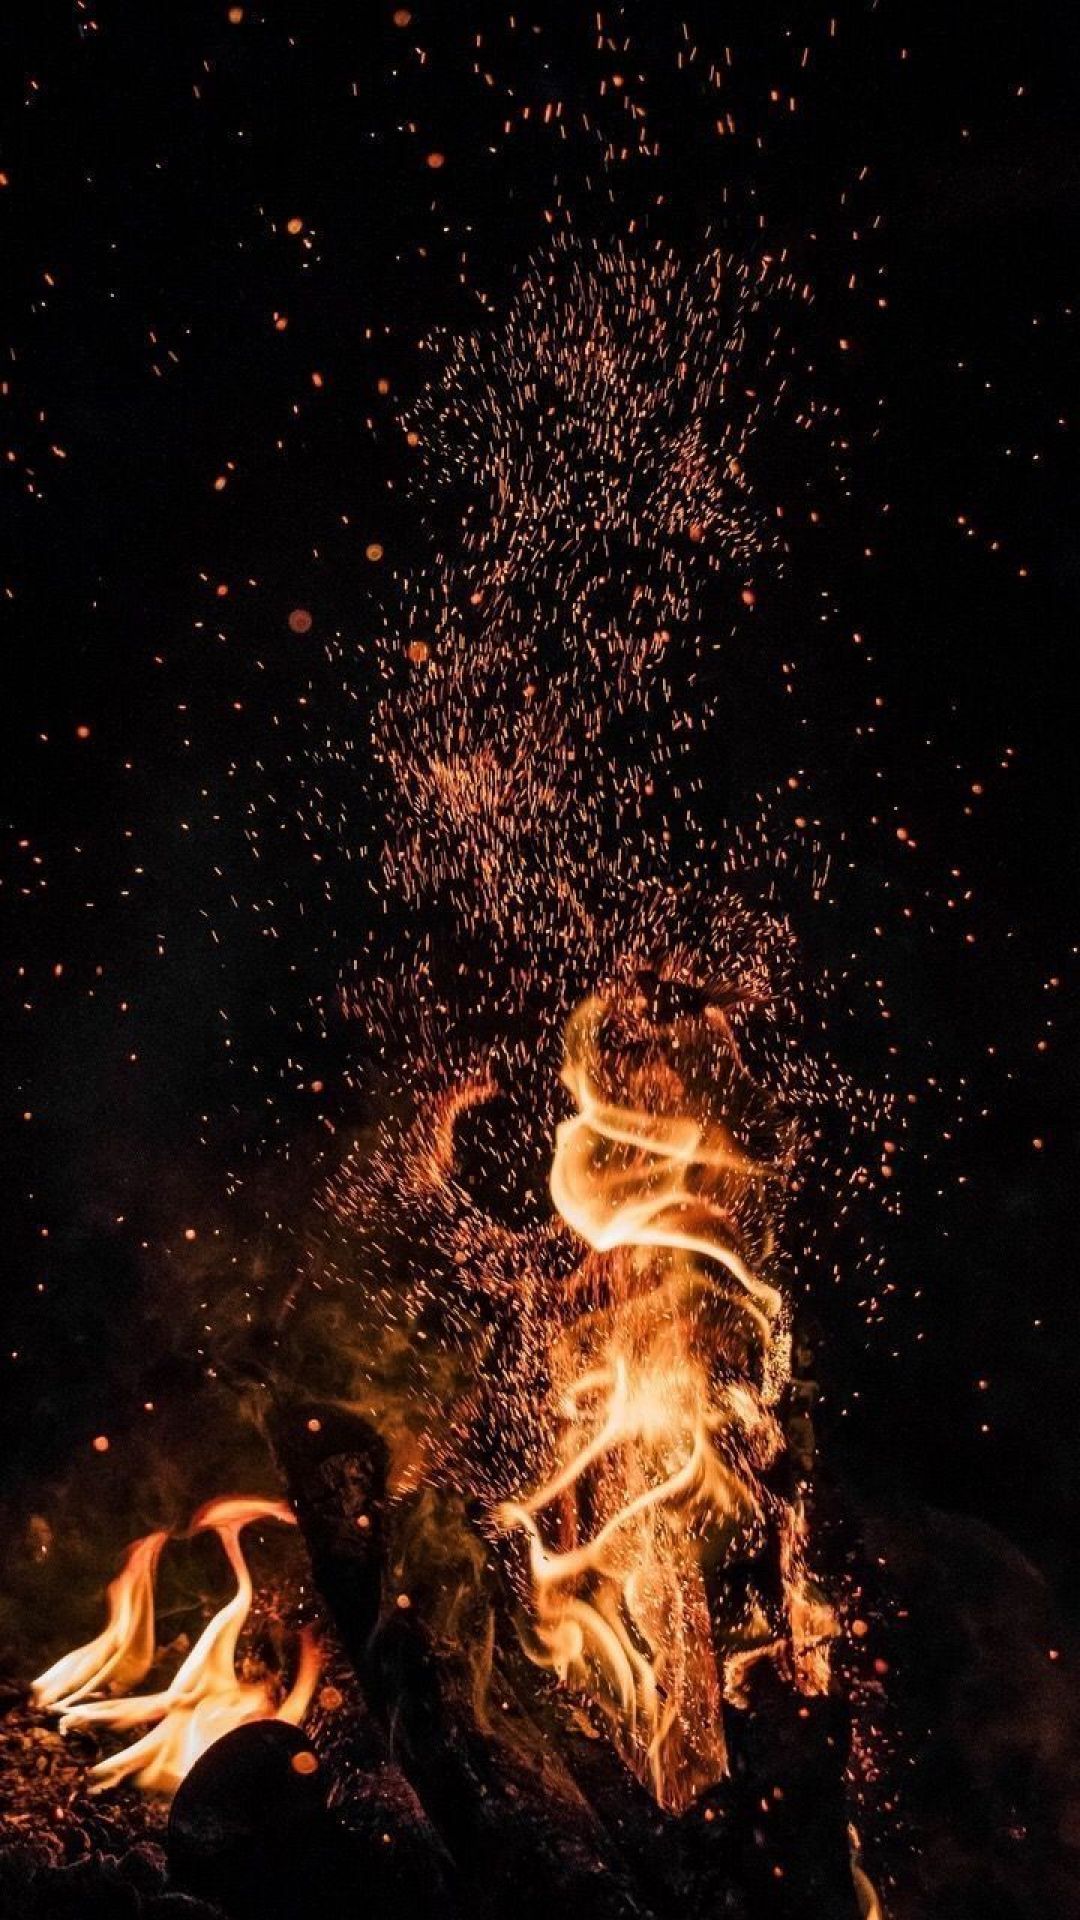 Fire iPhone Wallpaper with high-resolution 1080x1920 pixel. You can use this wallpaper for your iPhone 5, 6, 7, 8, X, XS, XR backgrounds, Mobile Screensaver, or iPad Lock Screen - Fire